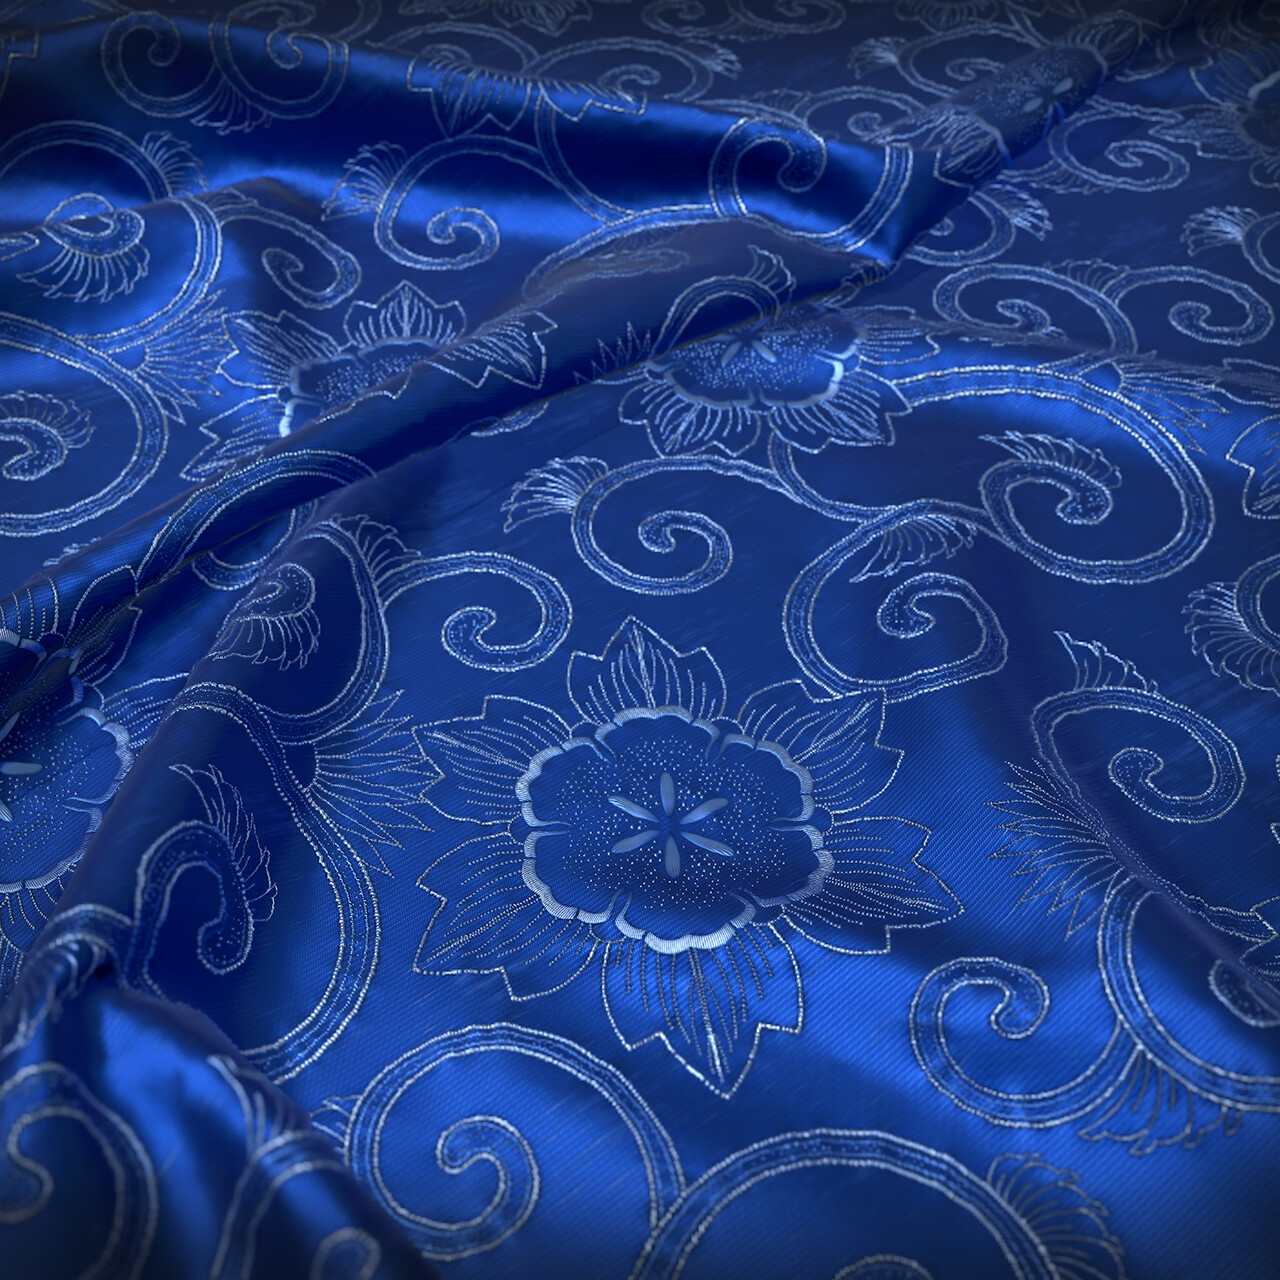 ArtStation - Fabric with floral pattern